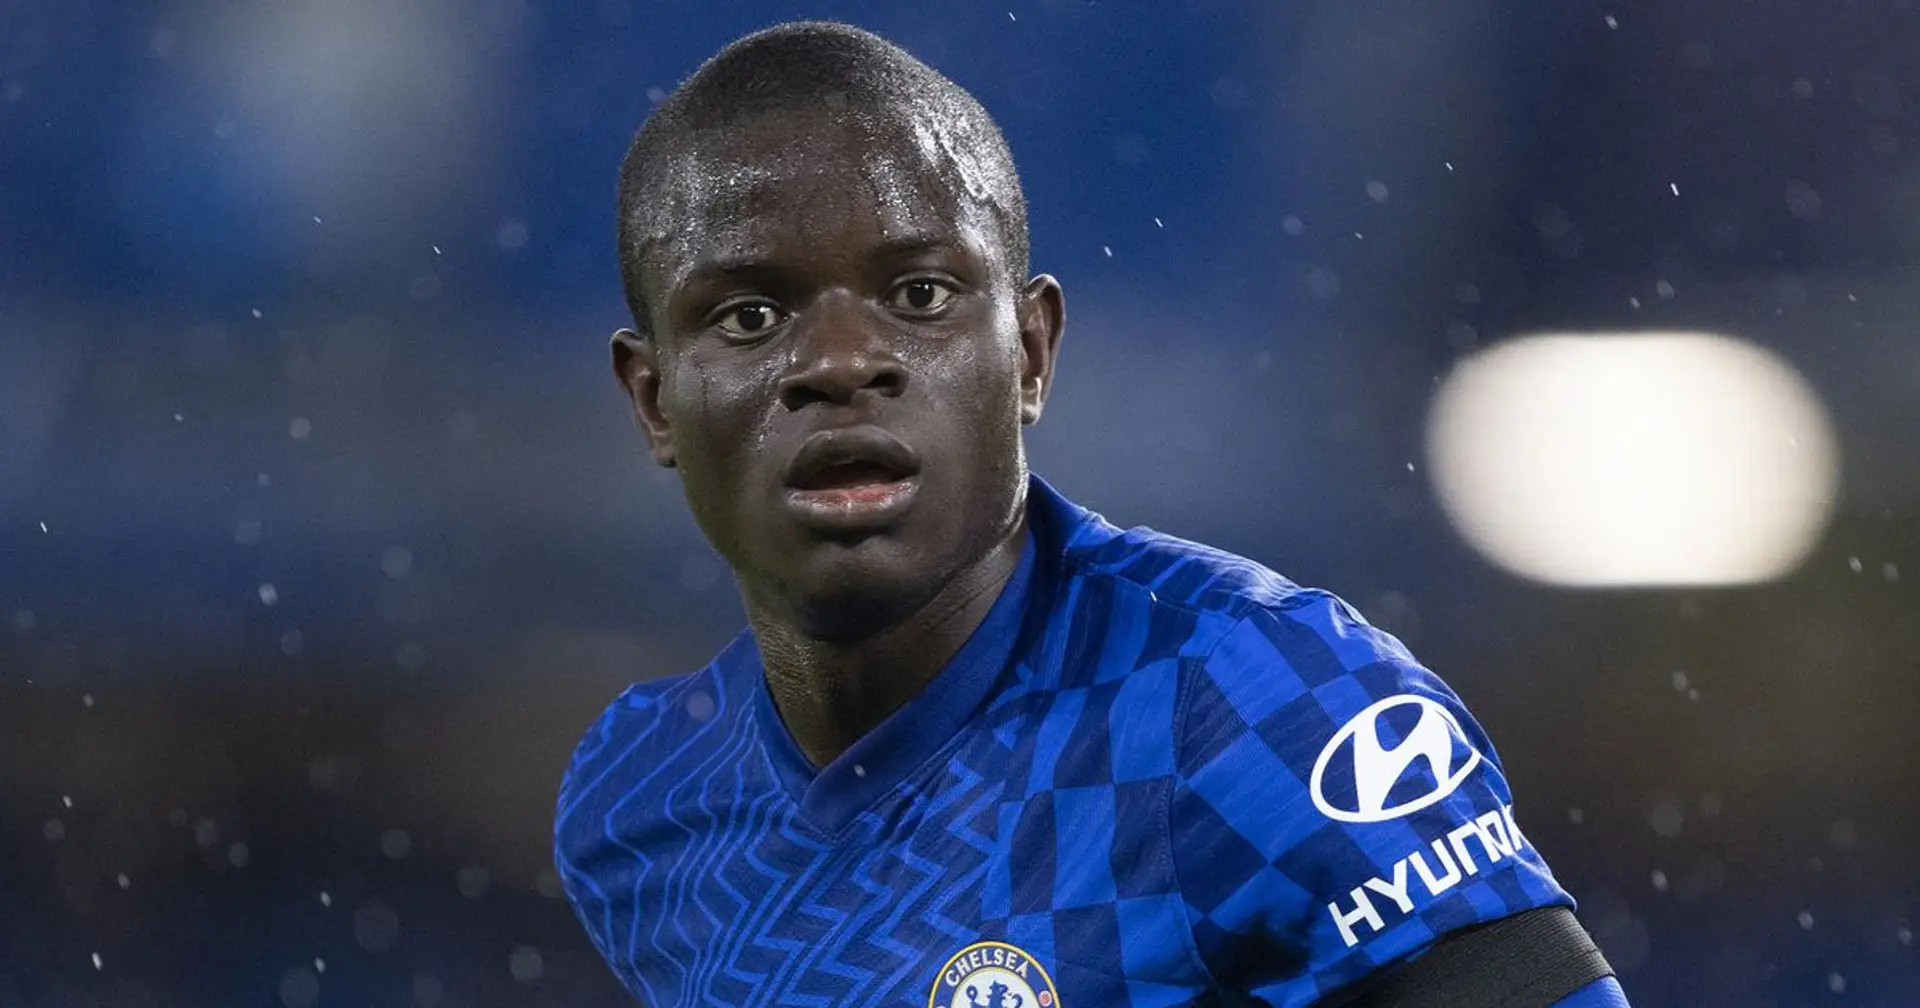 Kante left out of Chelsea squad as Blues fly to Malmo for Champions League game